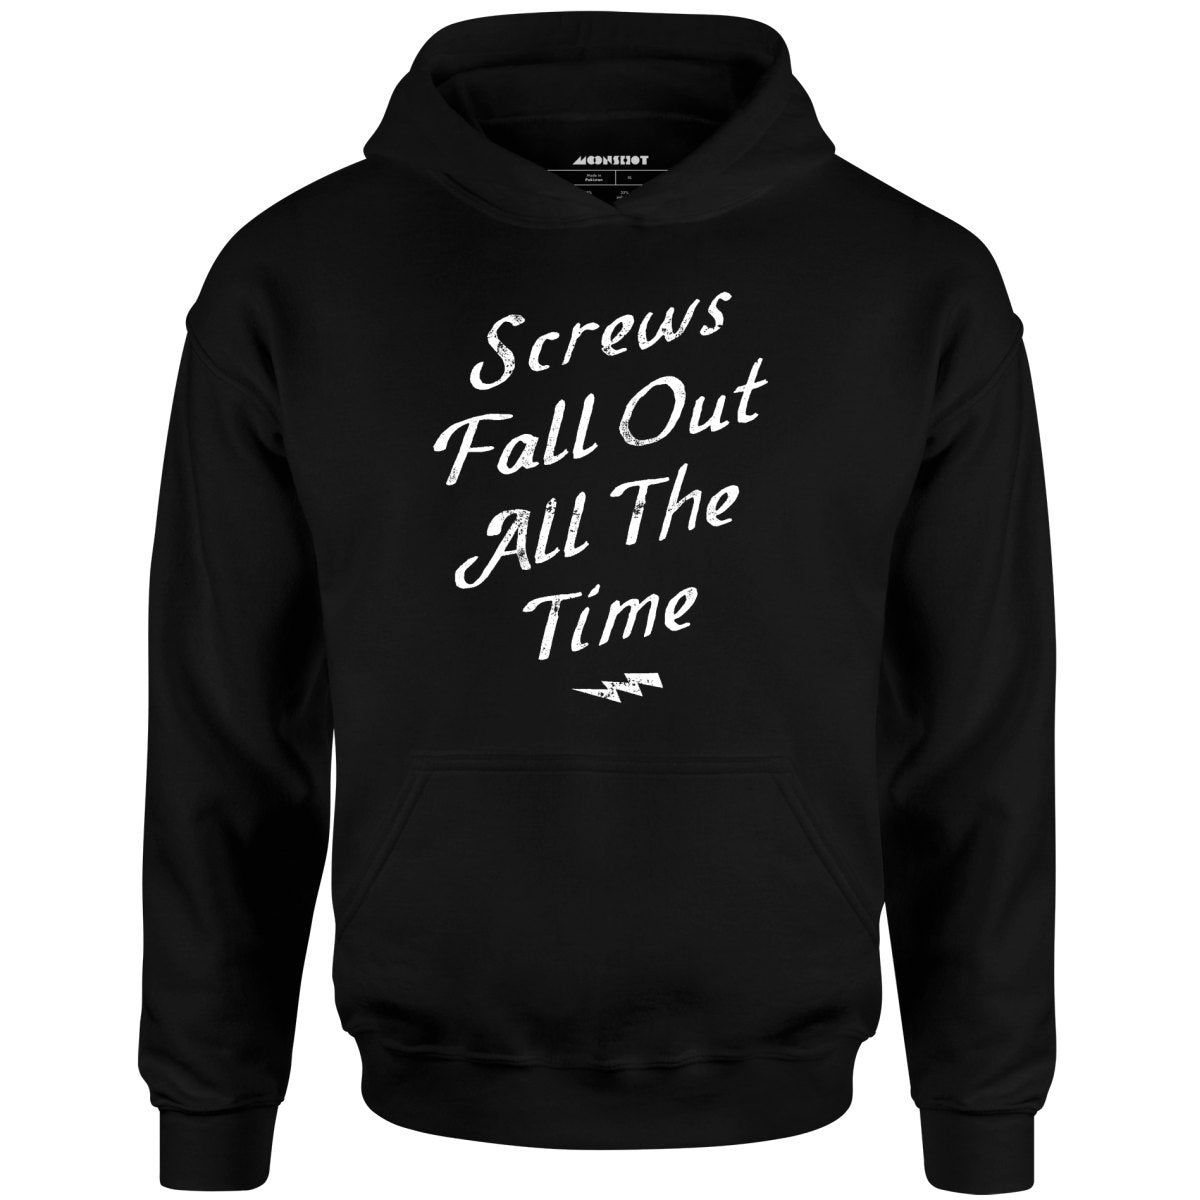 Screws Fall Out All The Time - Unisex Hoodie